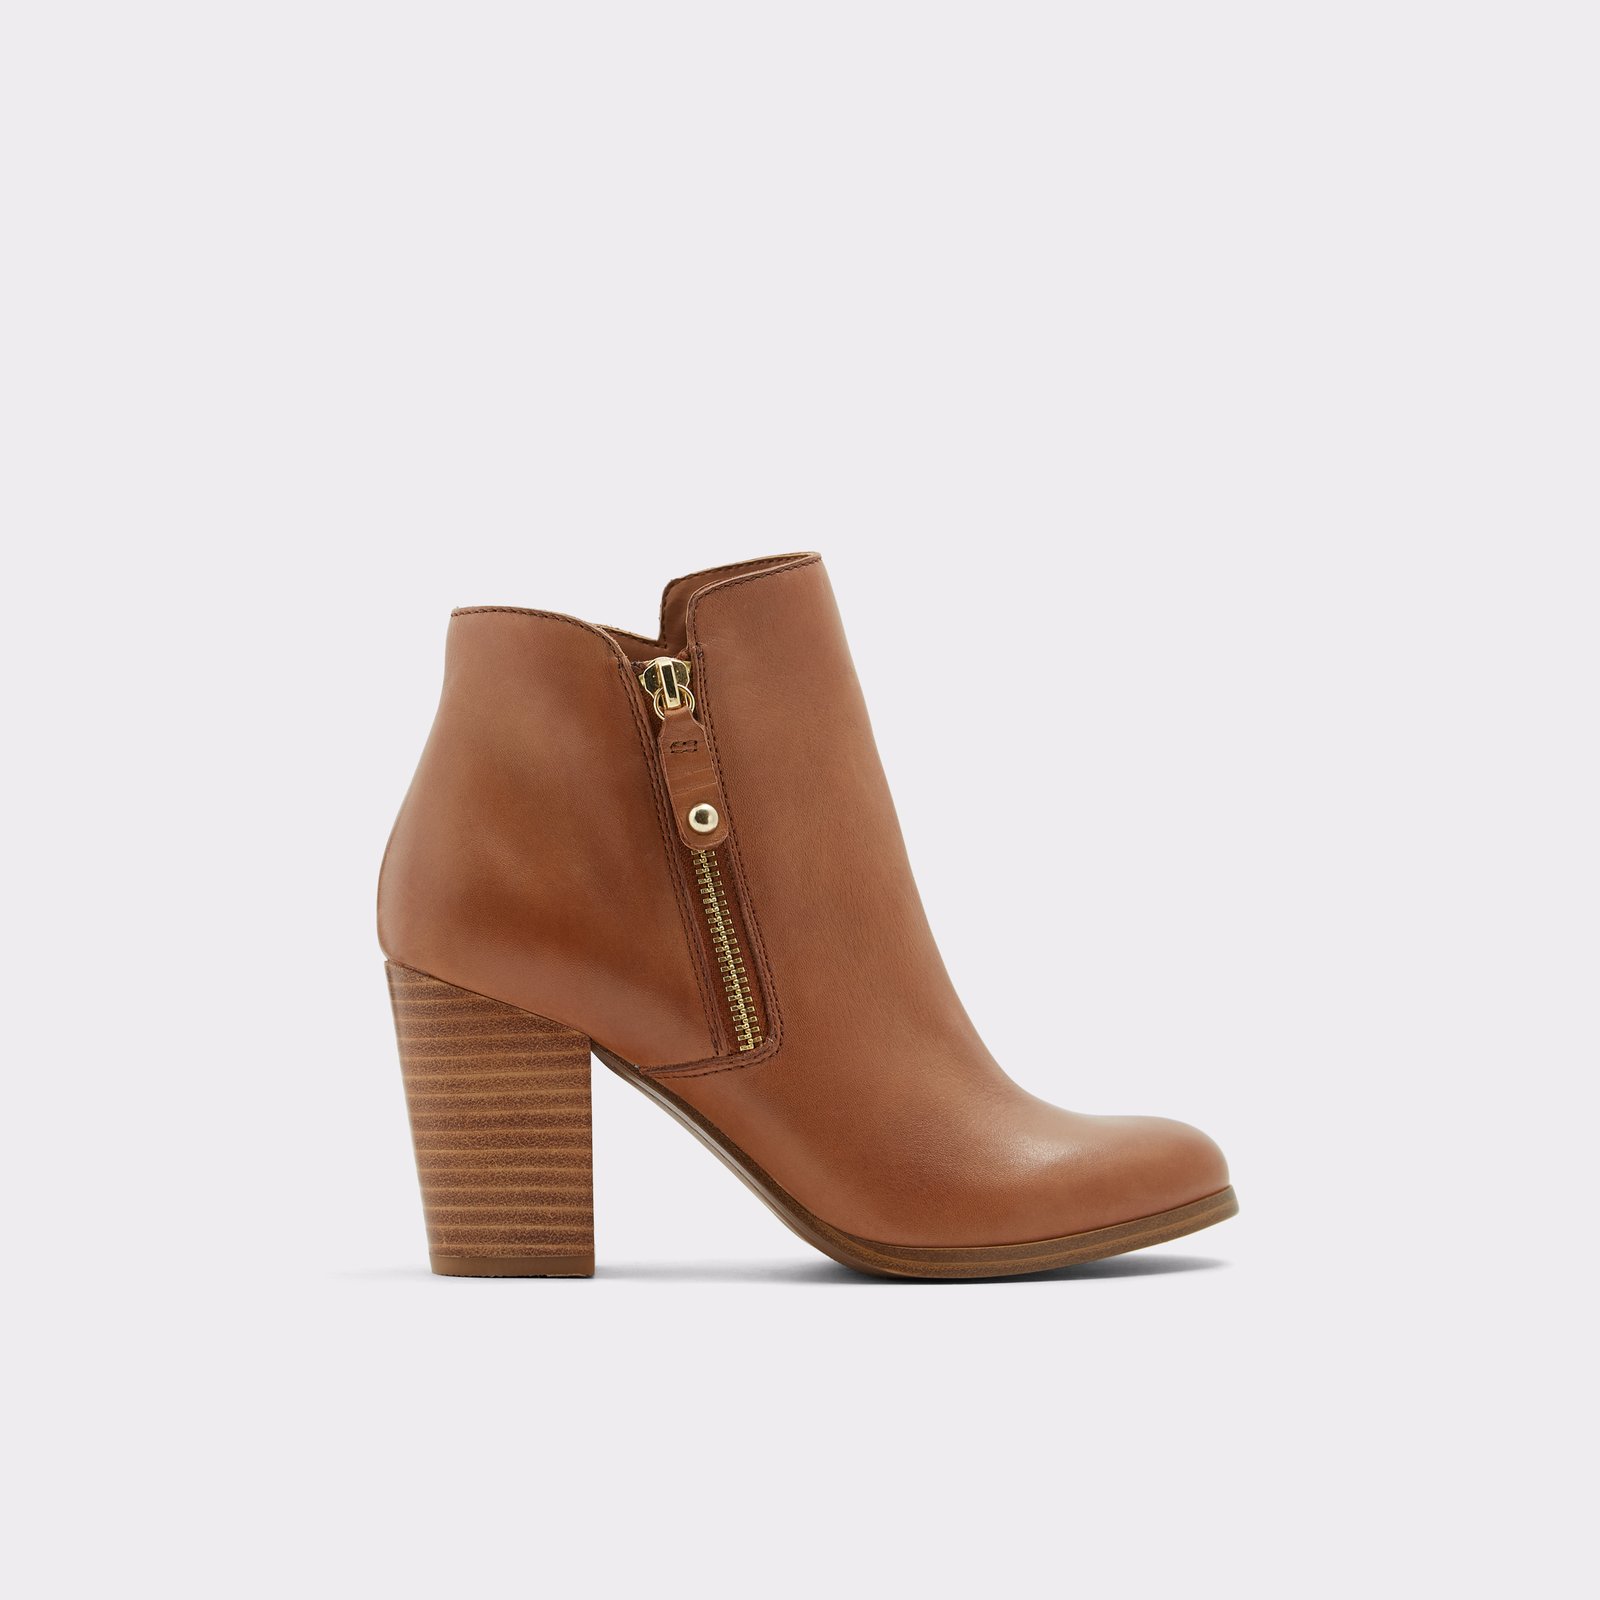 Ankle Boot - Brown, Size 8.5 